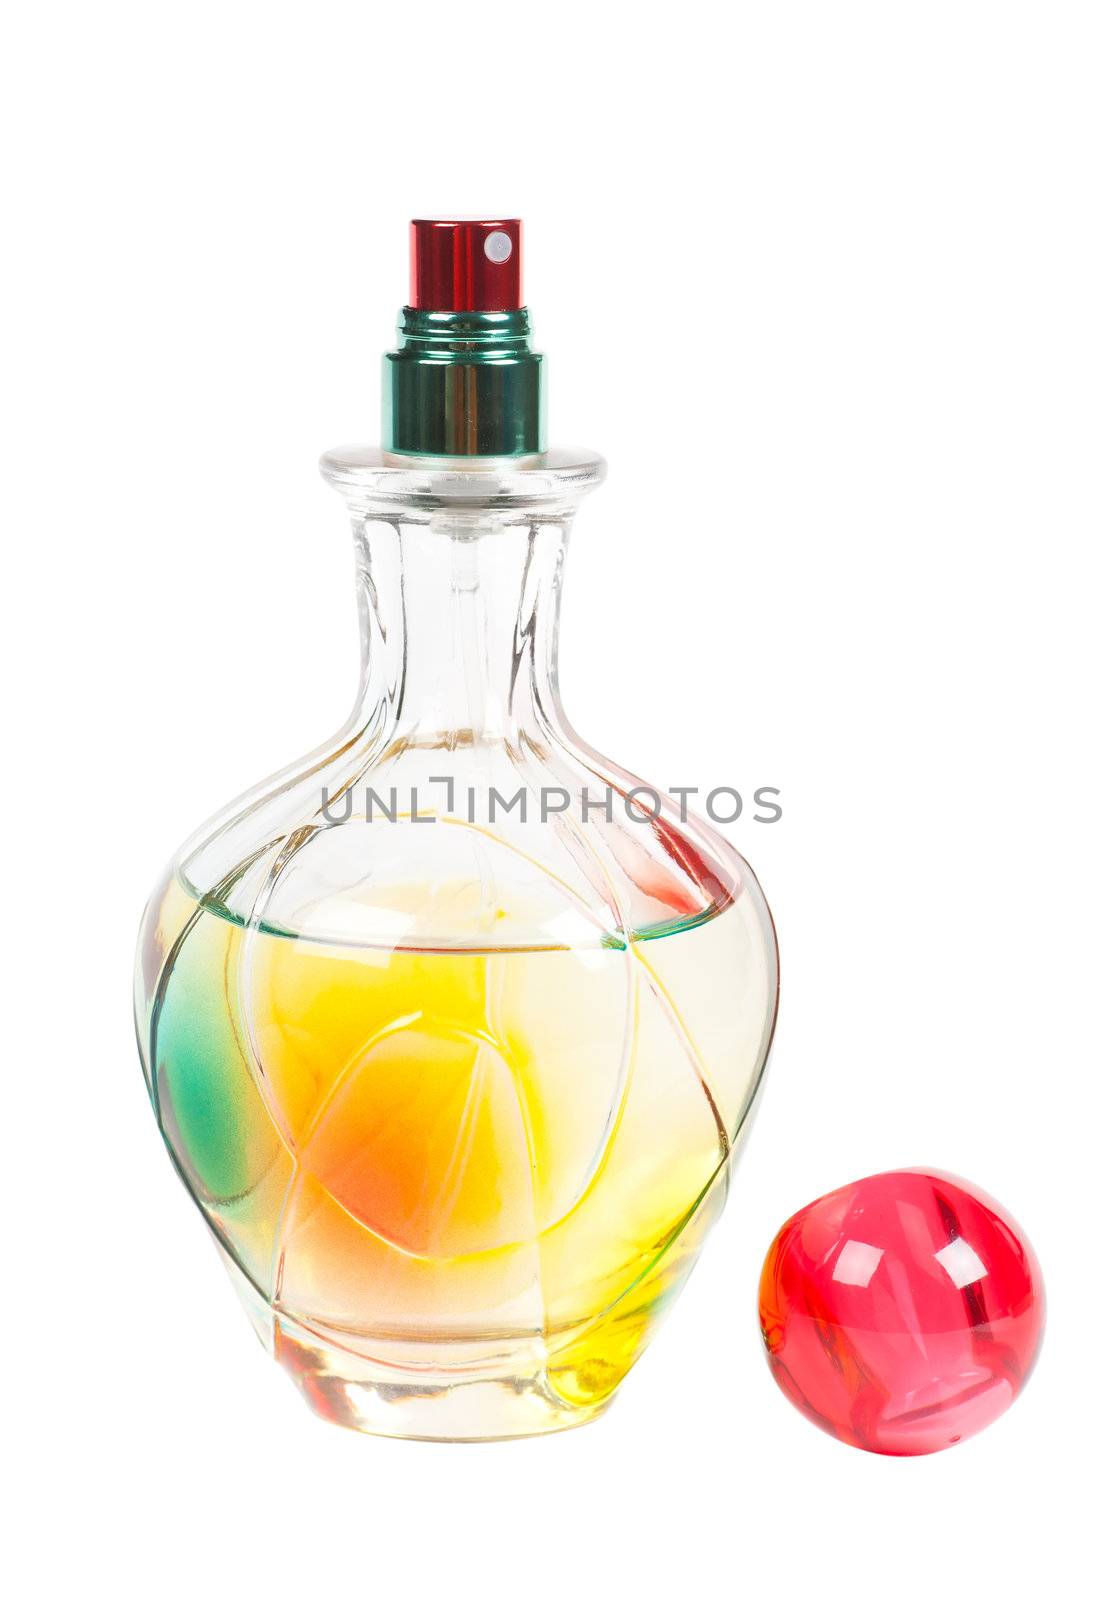 Sprayer of transparent perfume bottle isolated on while background. Macro view.